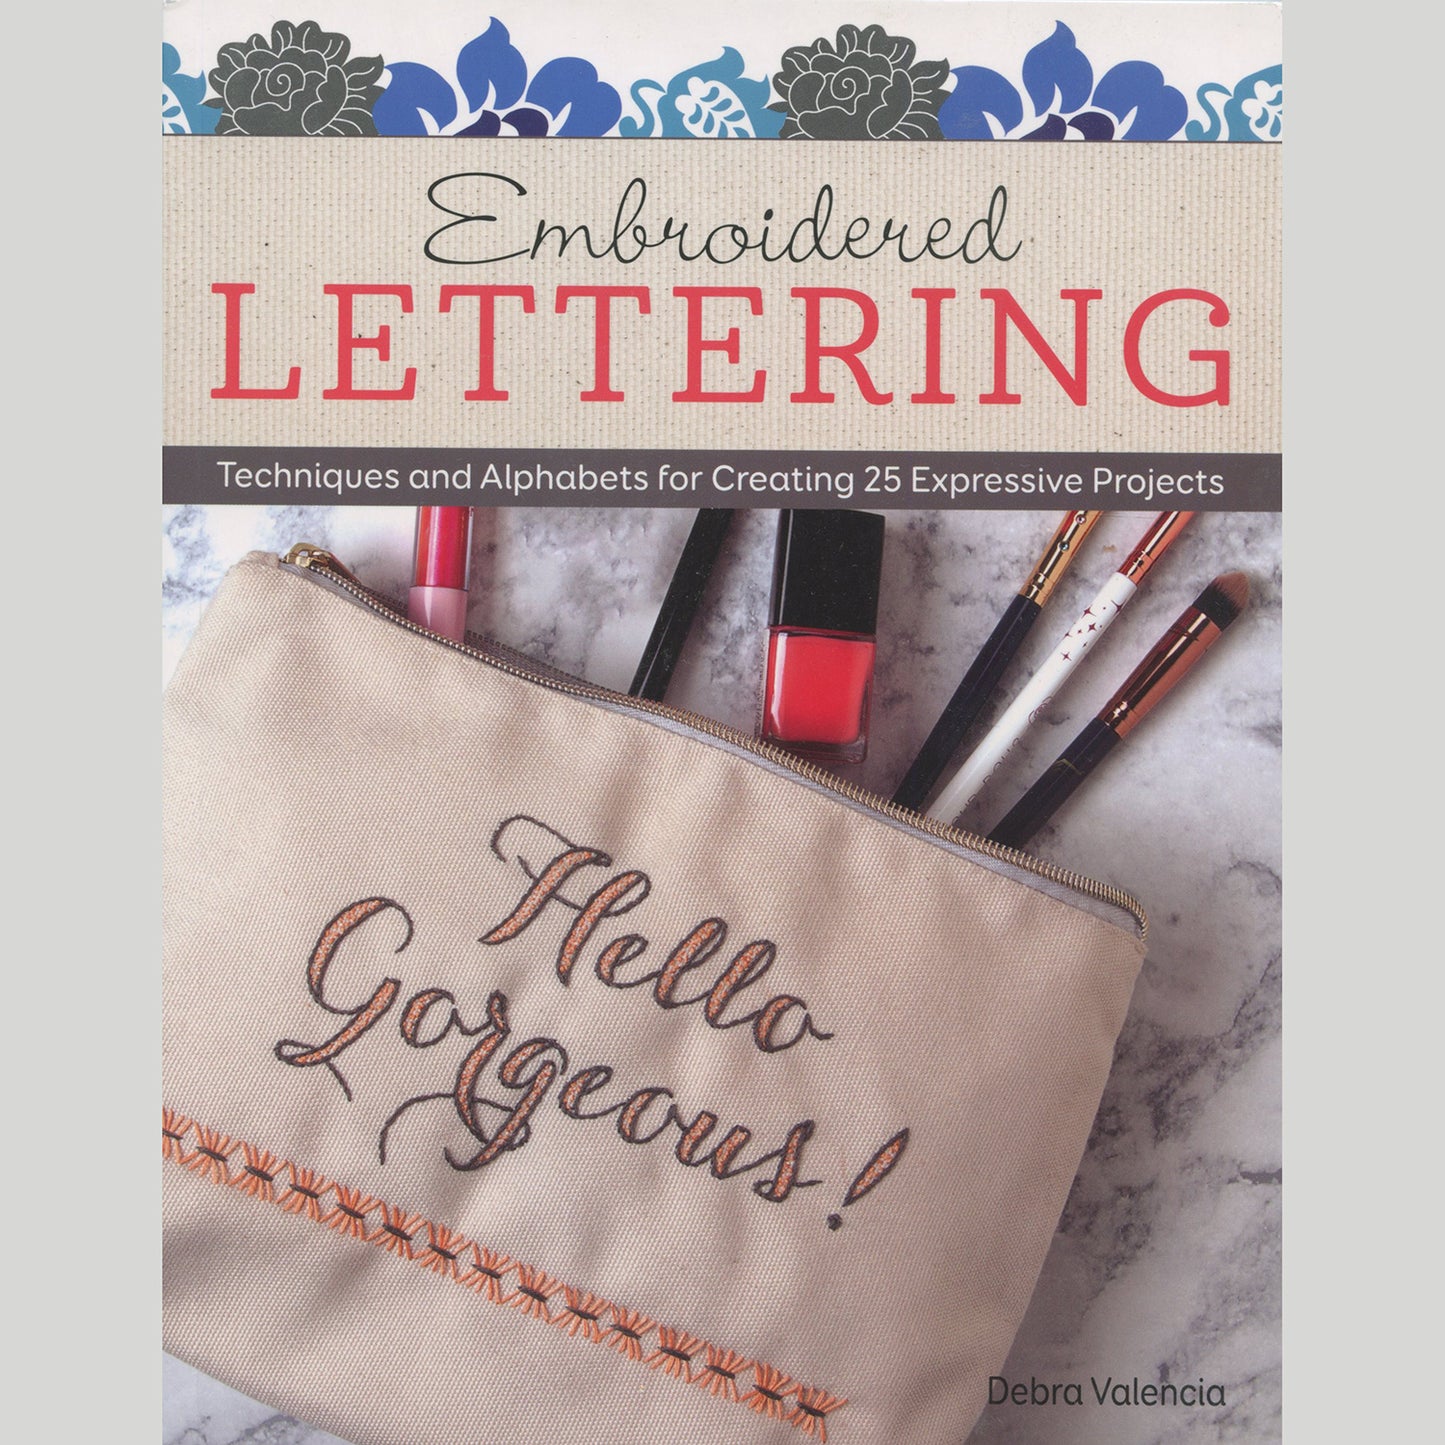 Embroidered Letting Book Primary Image